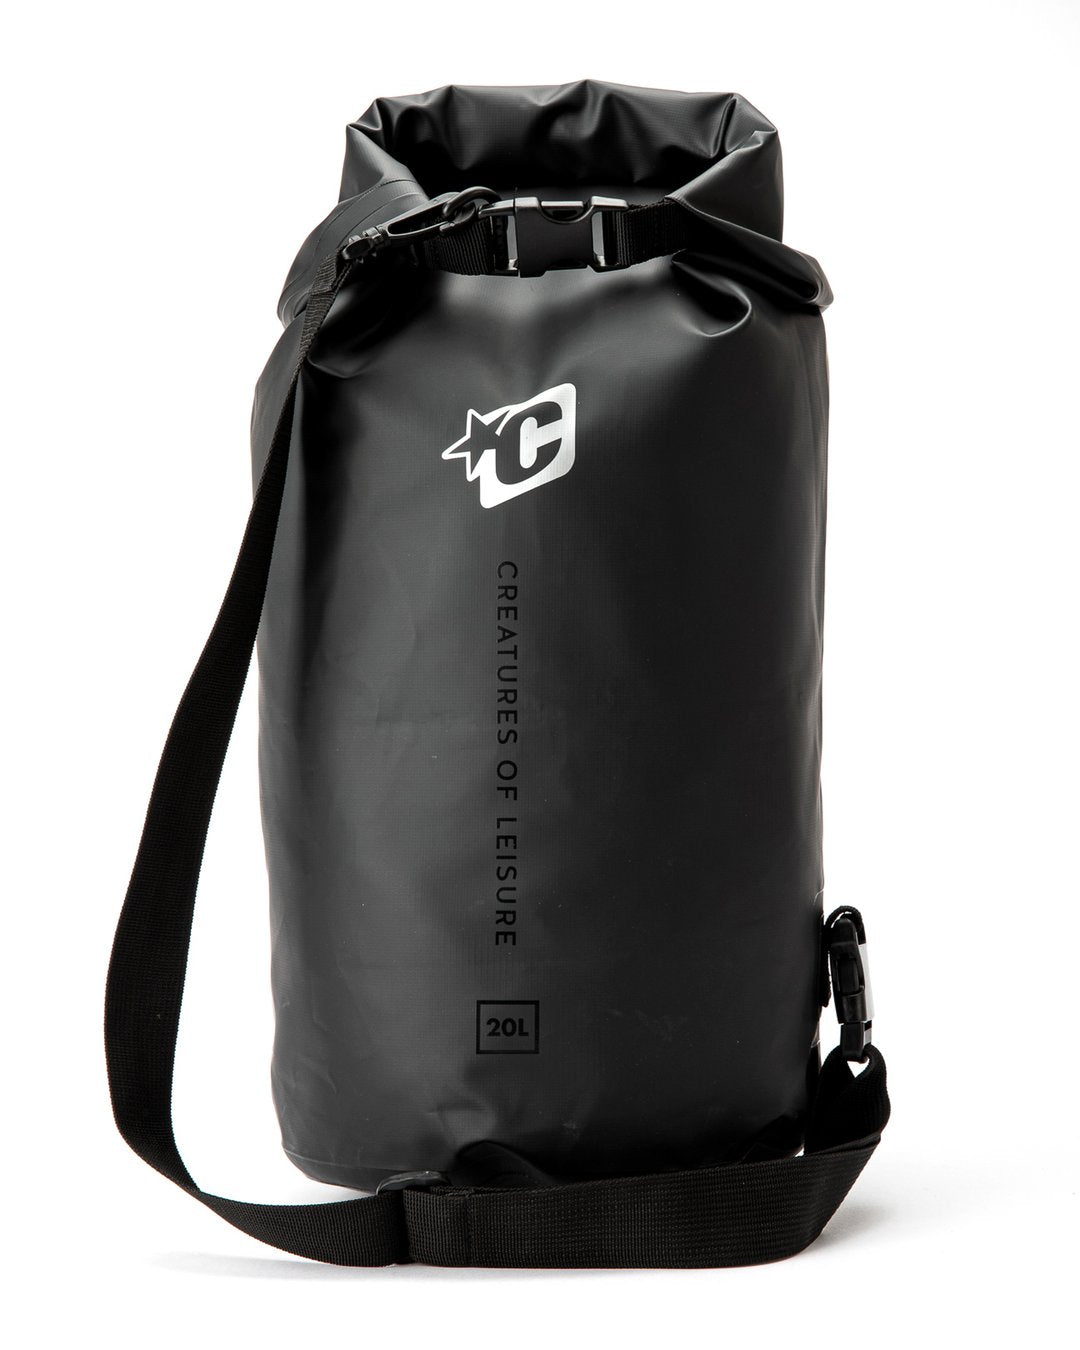 Creatures DAY USE DRY BAG 20L : BLACK - Board Store CreaturesAccessories  